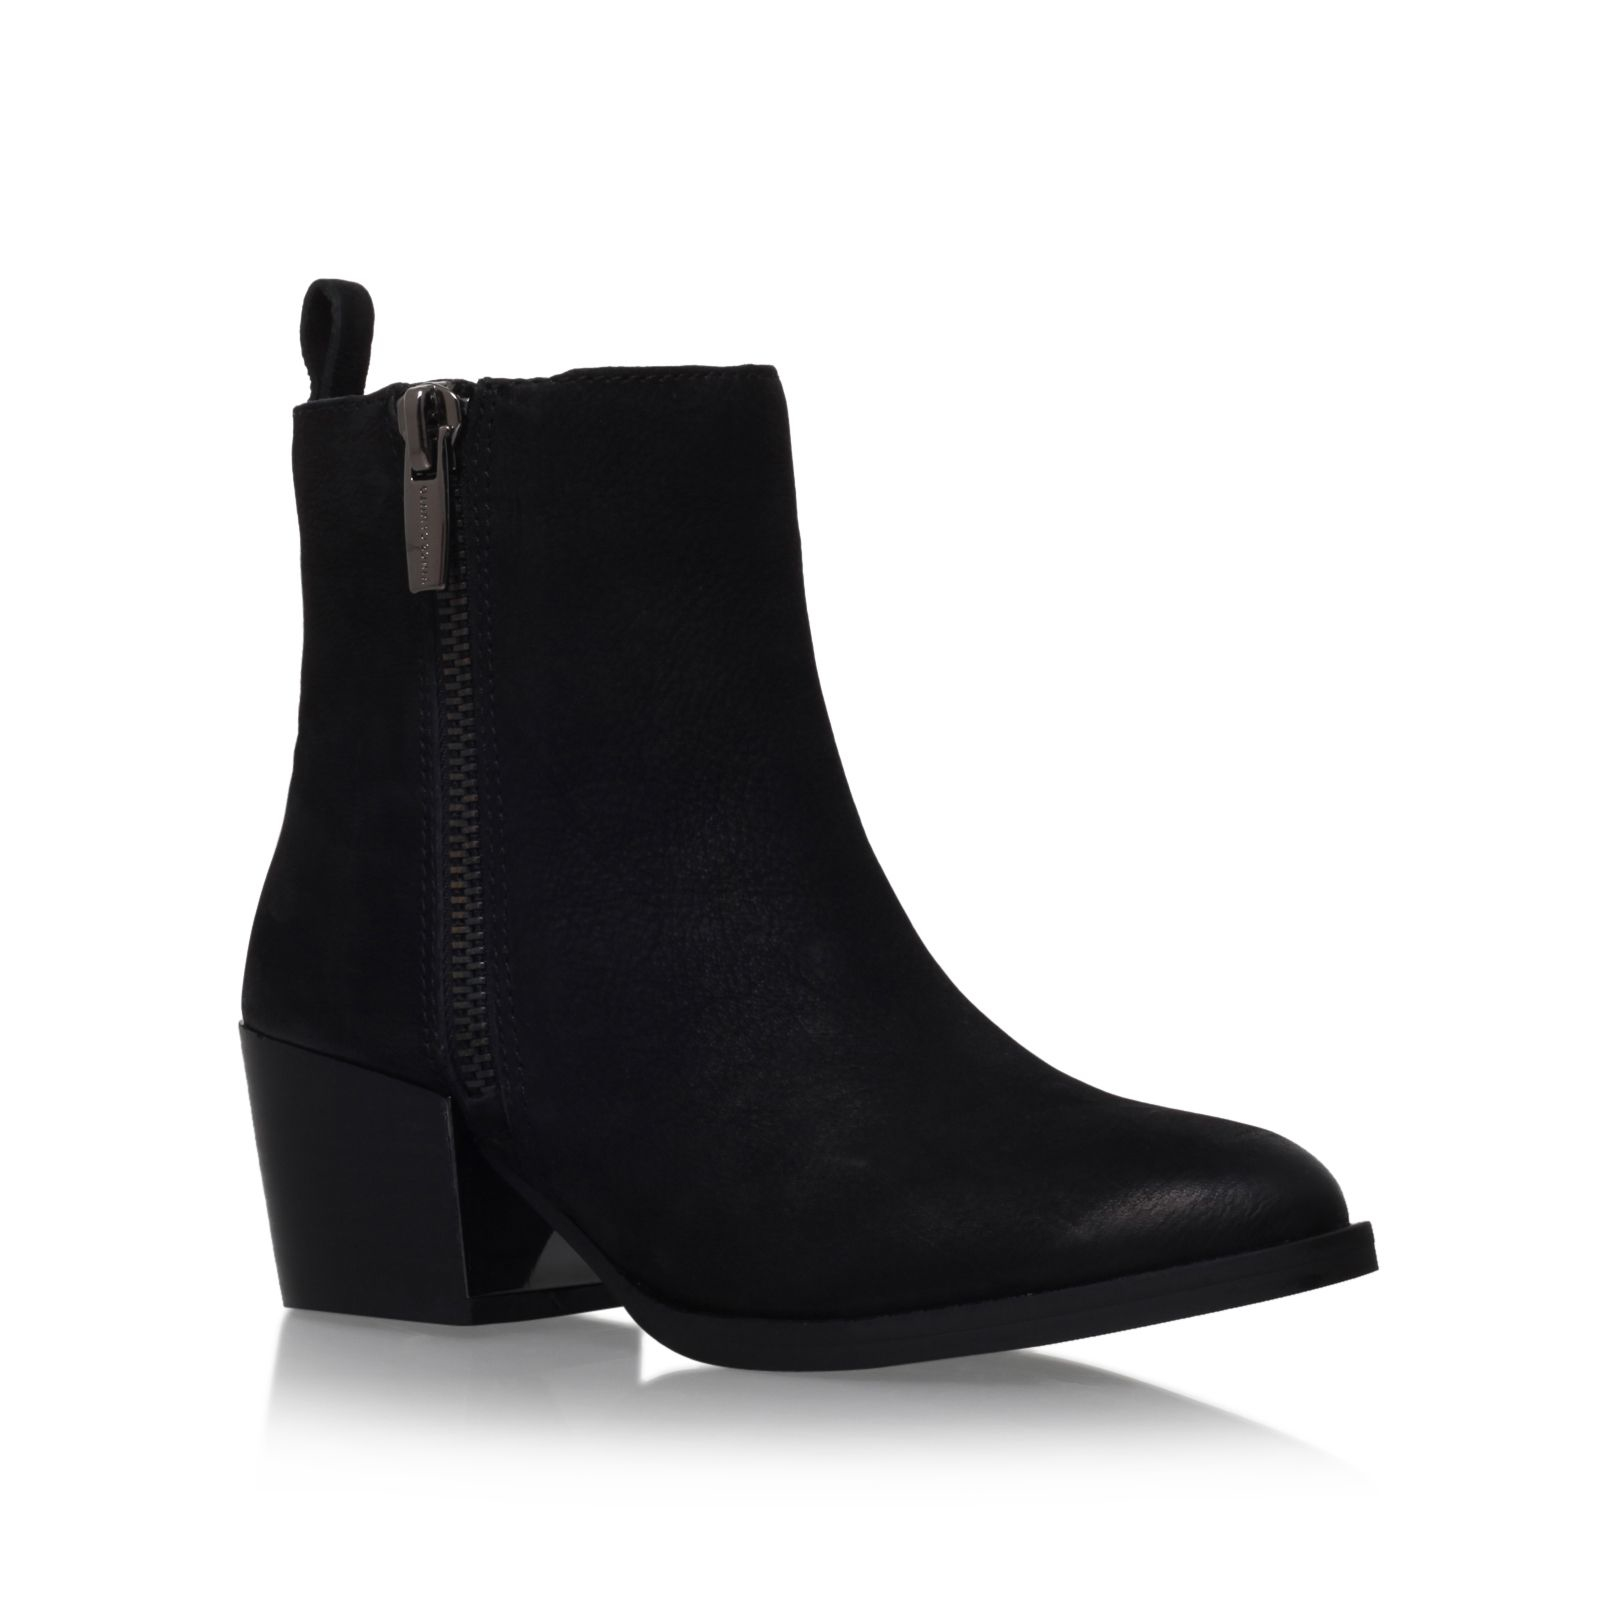 Vince camuto Imala Low Heel Ankle Boots in Black | Lyst